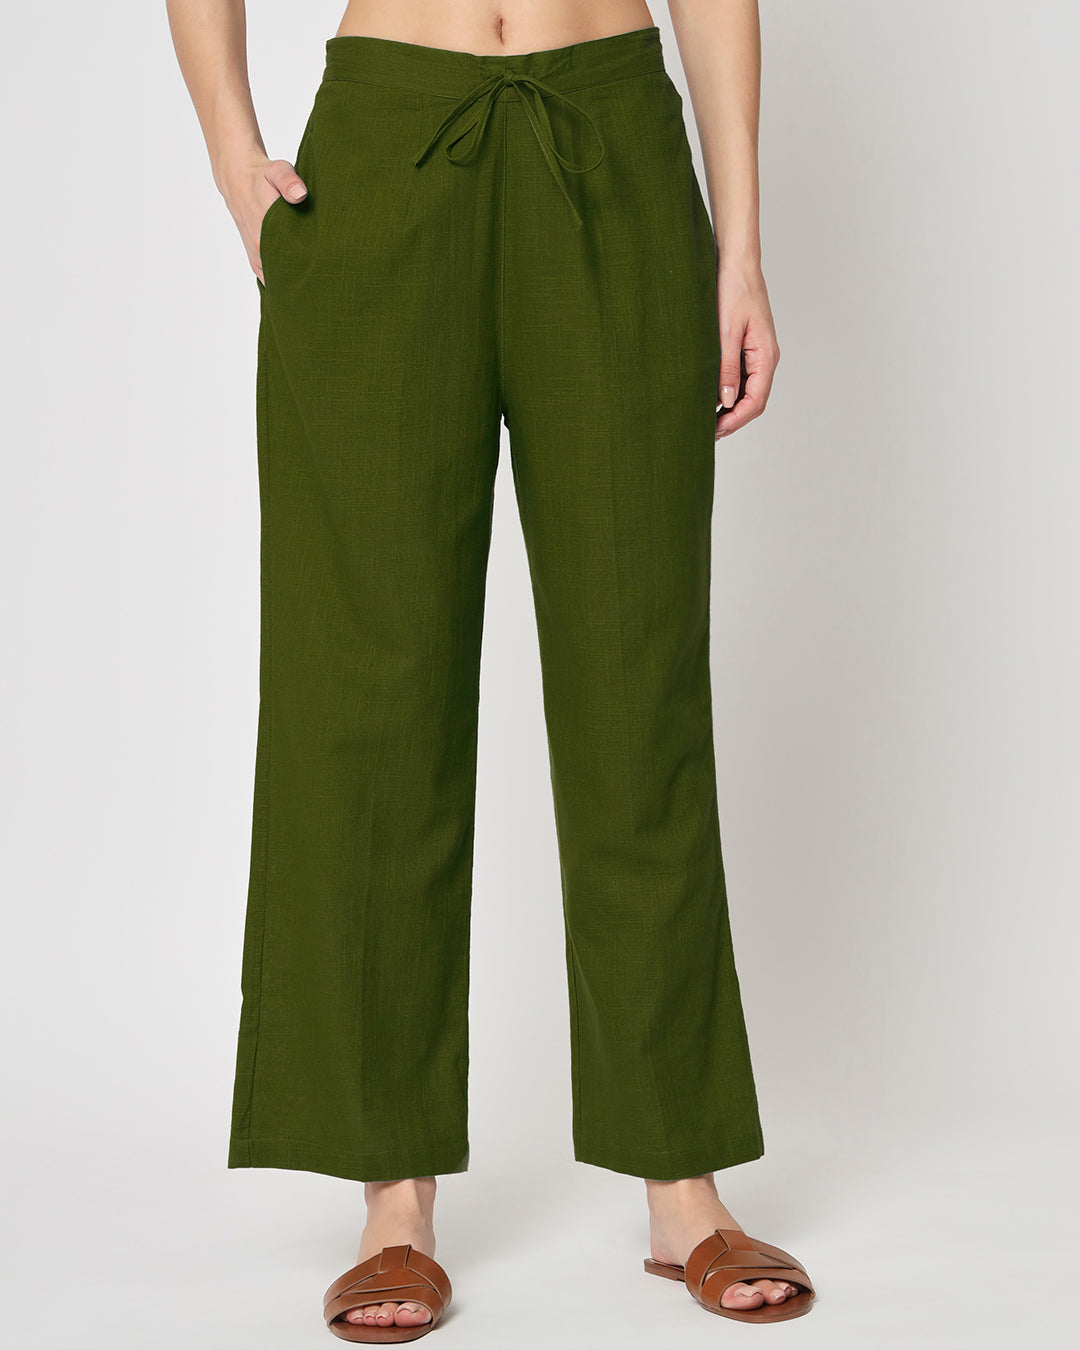 Combo: Greening Spring & Forest Green Straight Pants- Set of 2